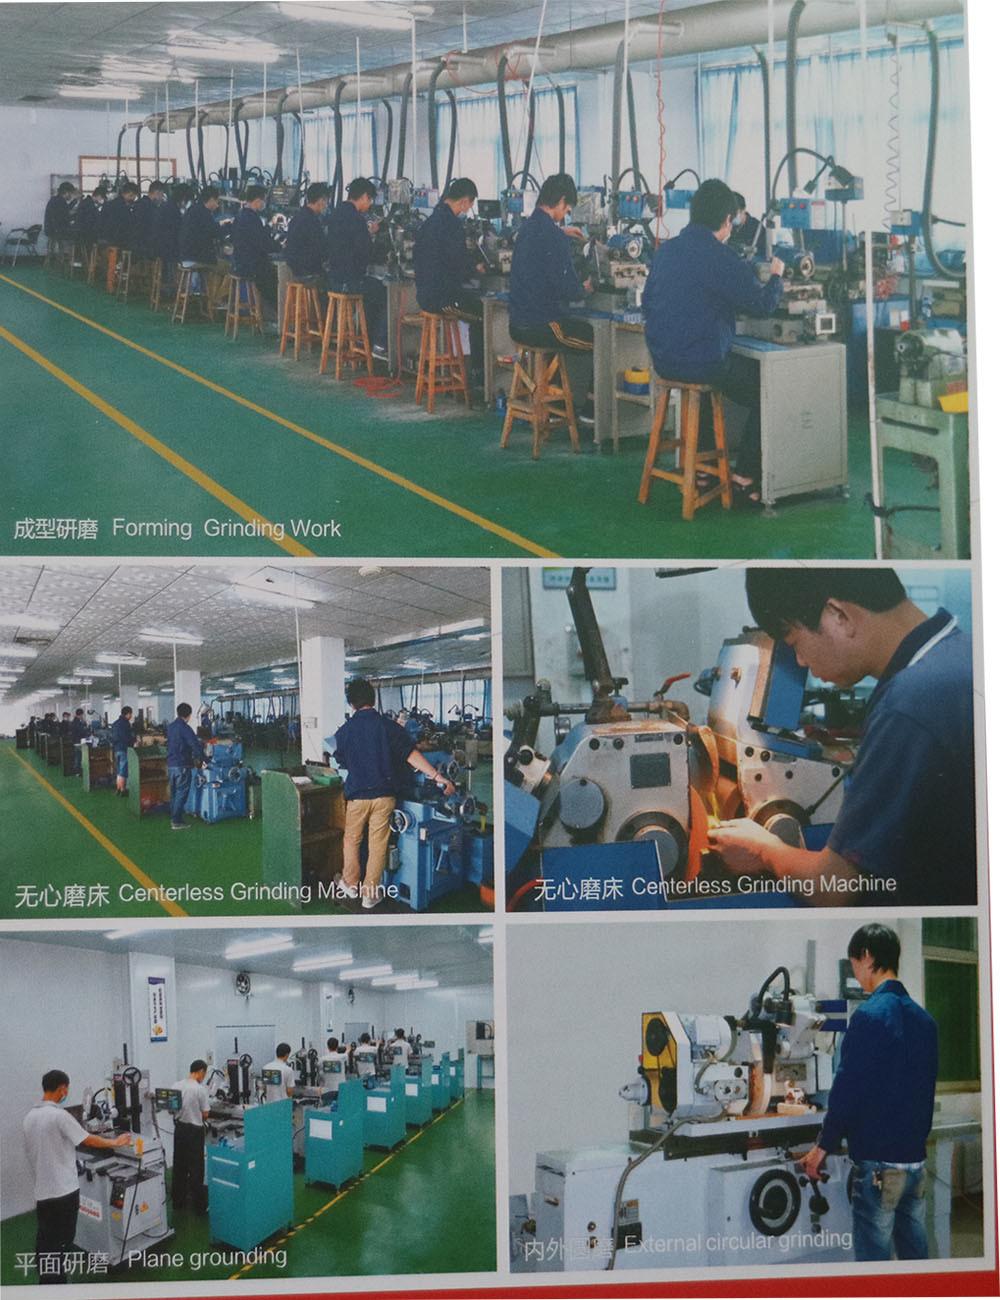 Dongguan Factory Making Various Metal Parts Assembly Copper Aluminum Alloy Products